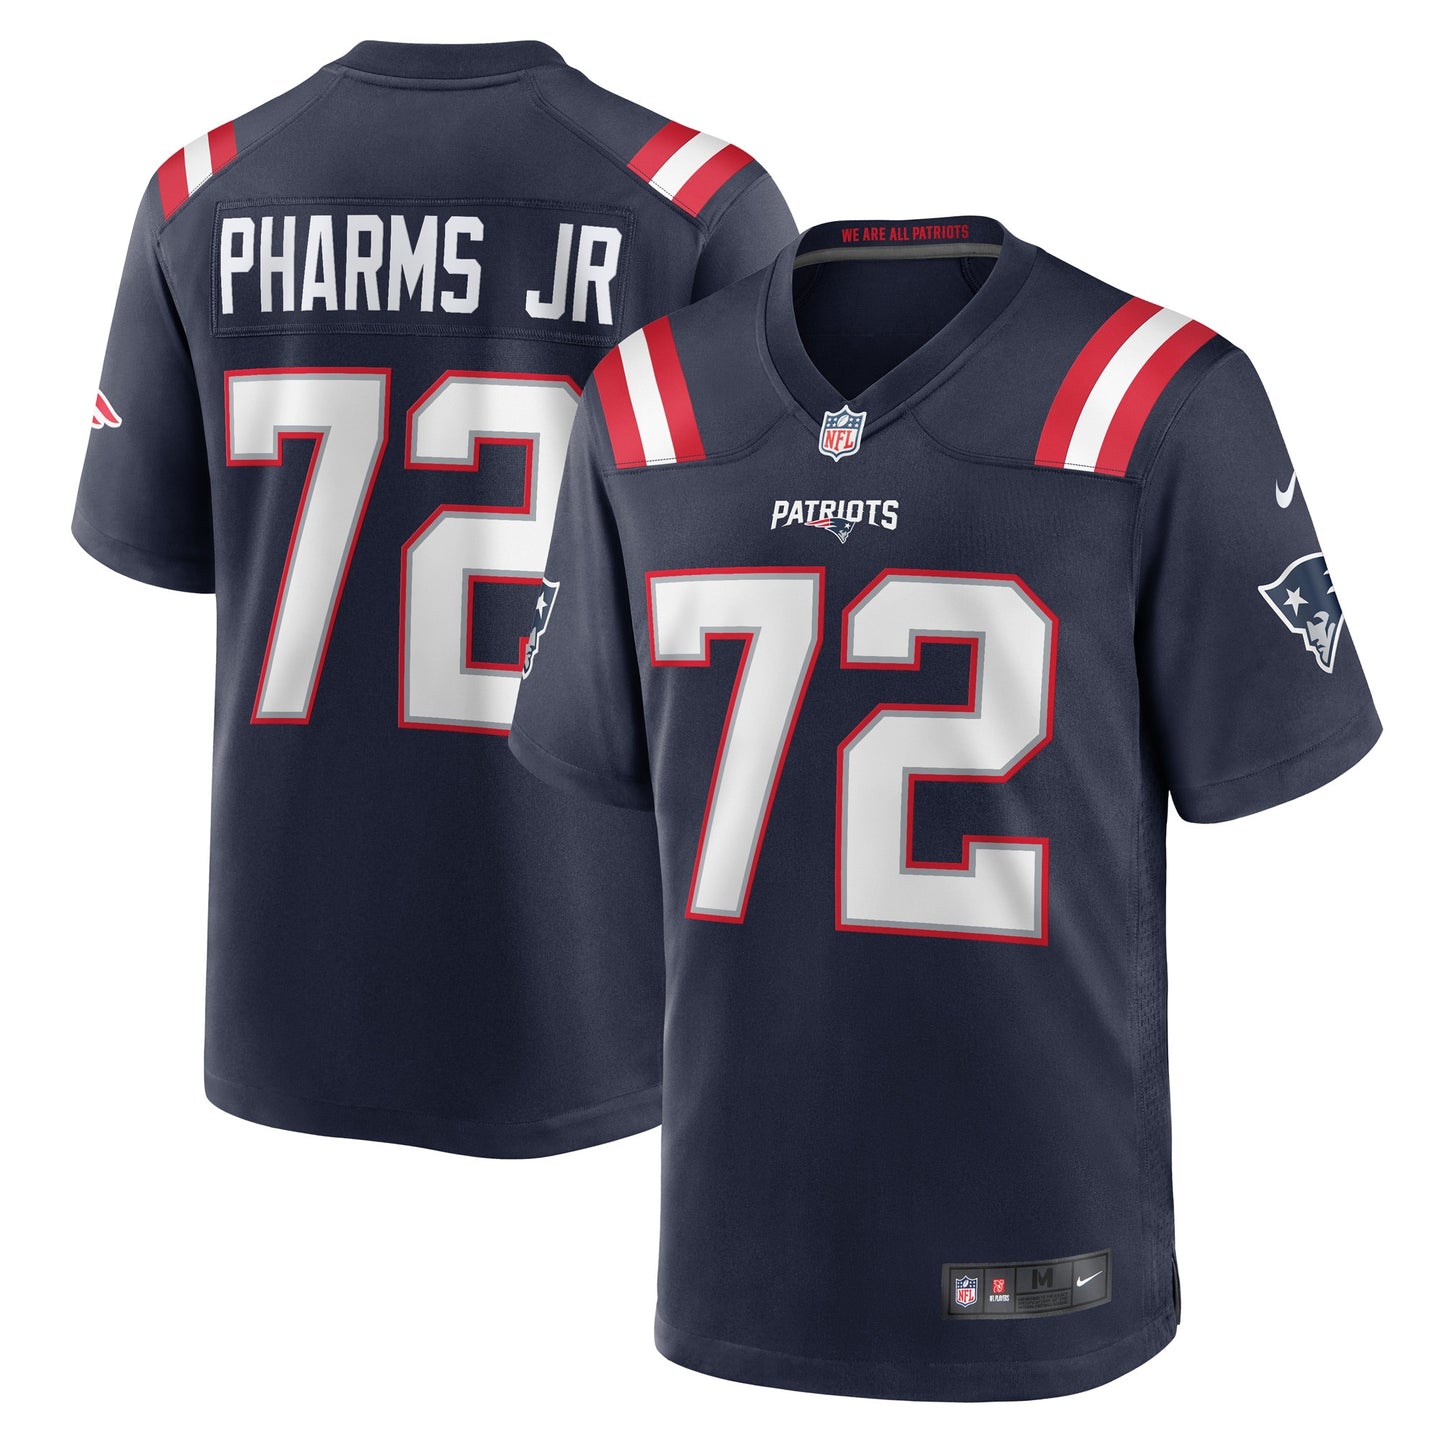 Jeremiah Pharms Jr. New England Patriots Nike Game Player Jersey - Navy